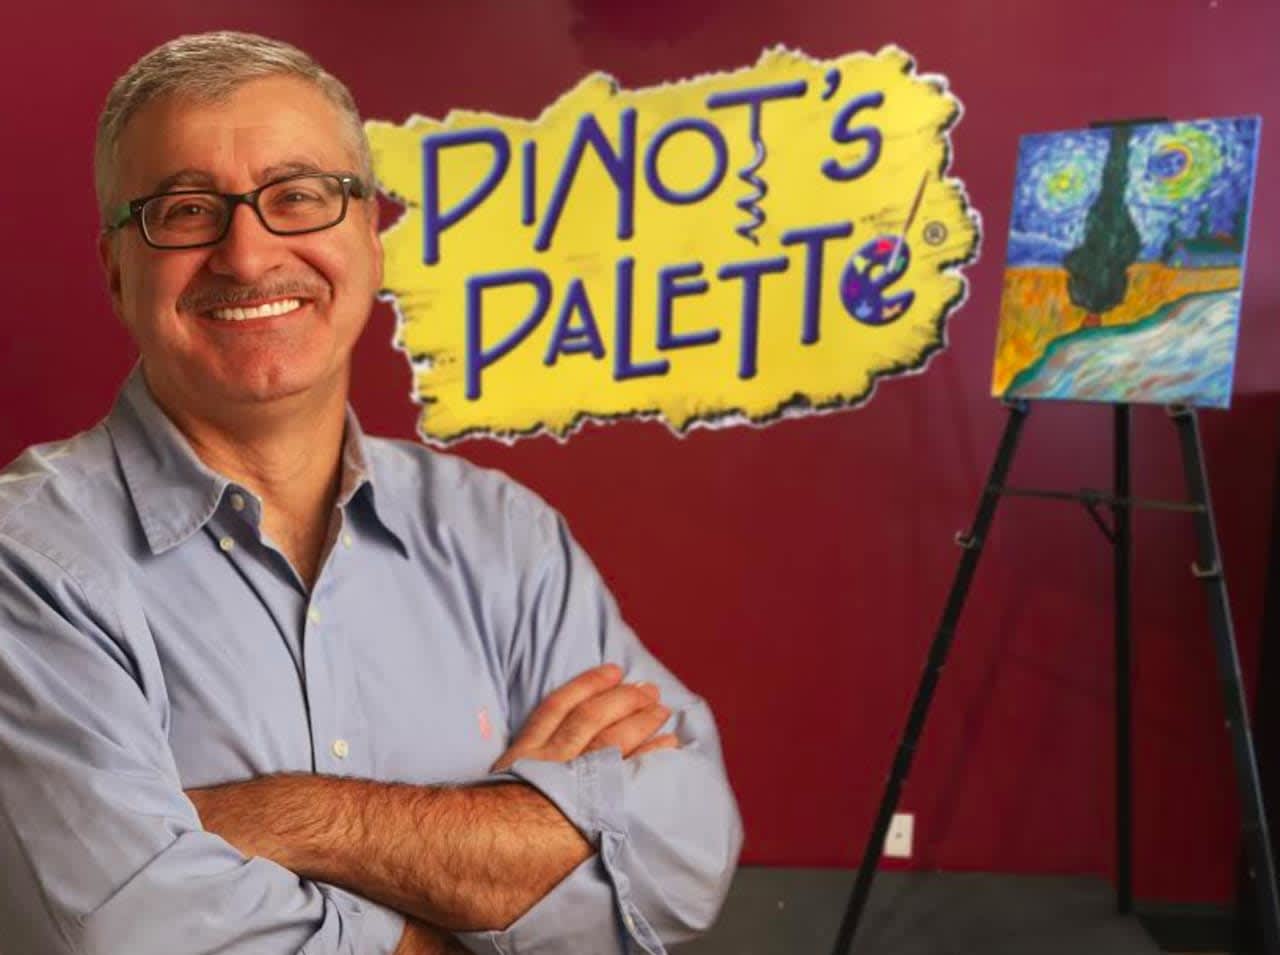 Pat Cipollone is brining painting fun to lower Westchester with Pinot's Palette in Tuckahoe.